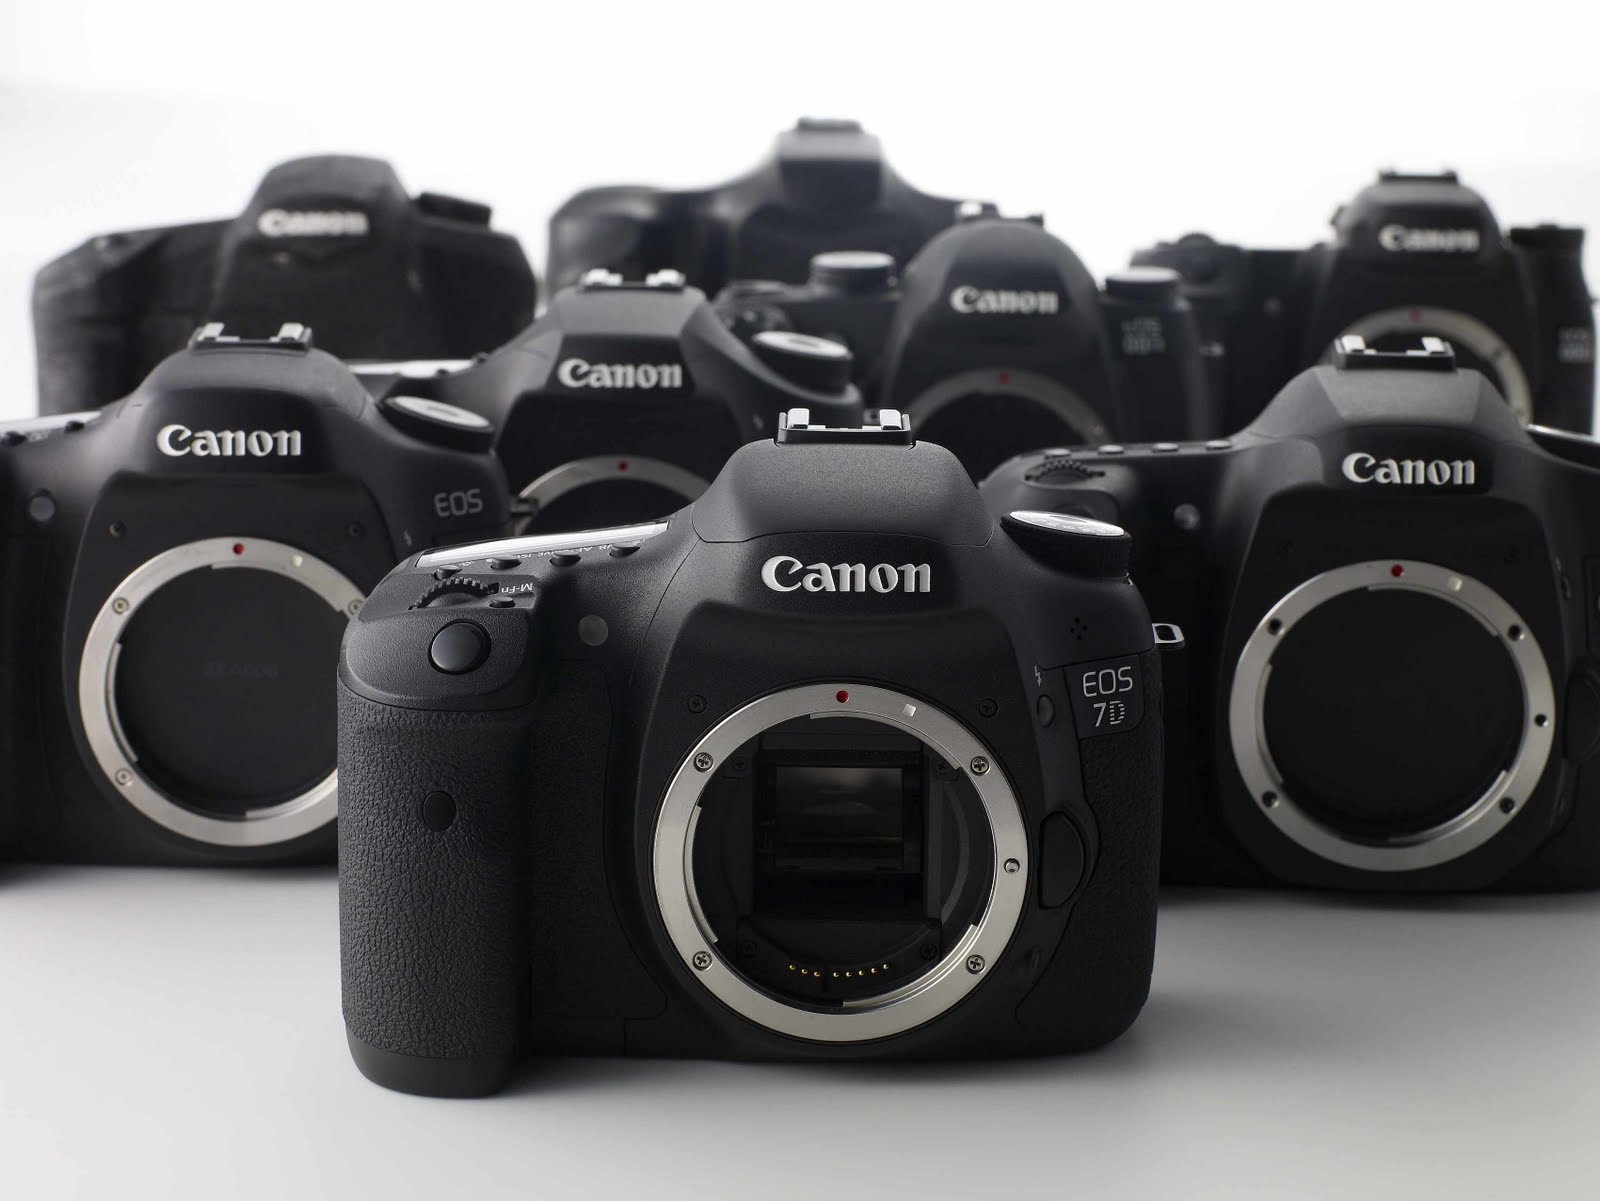 For Canon lovers: Which Canon dSLR?